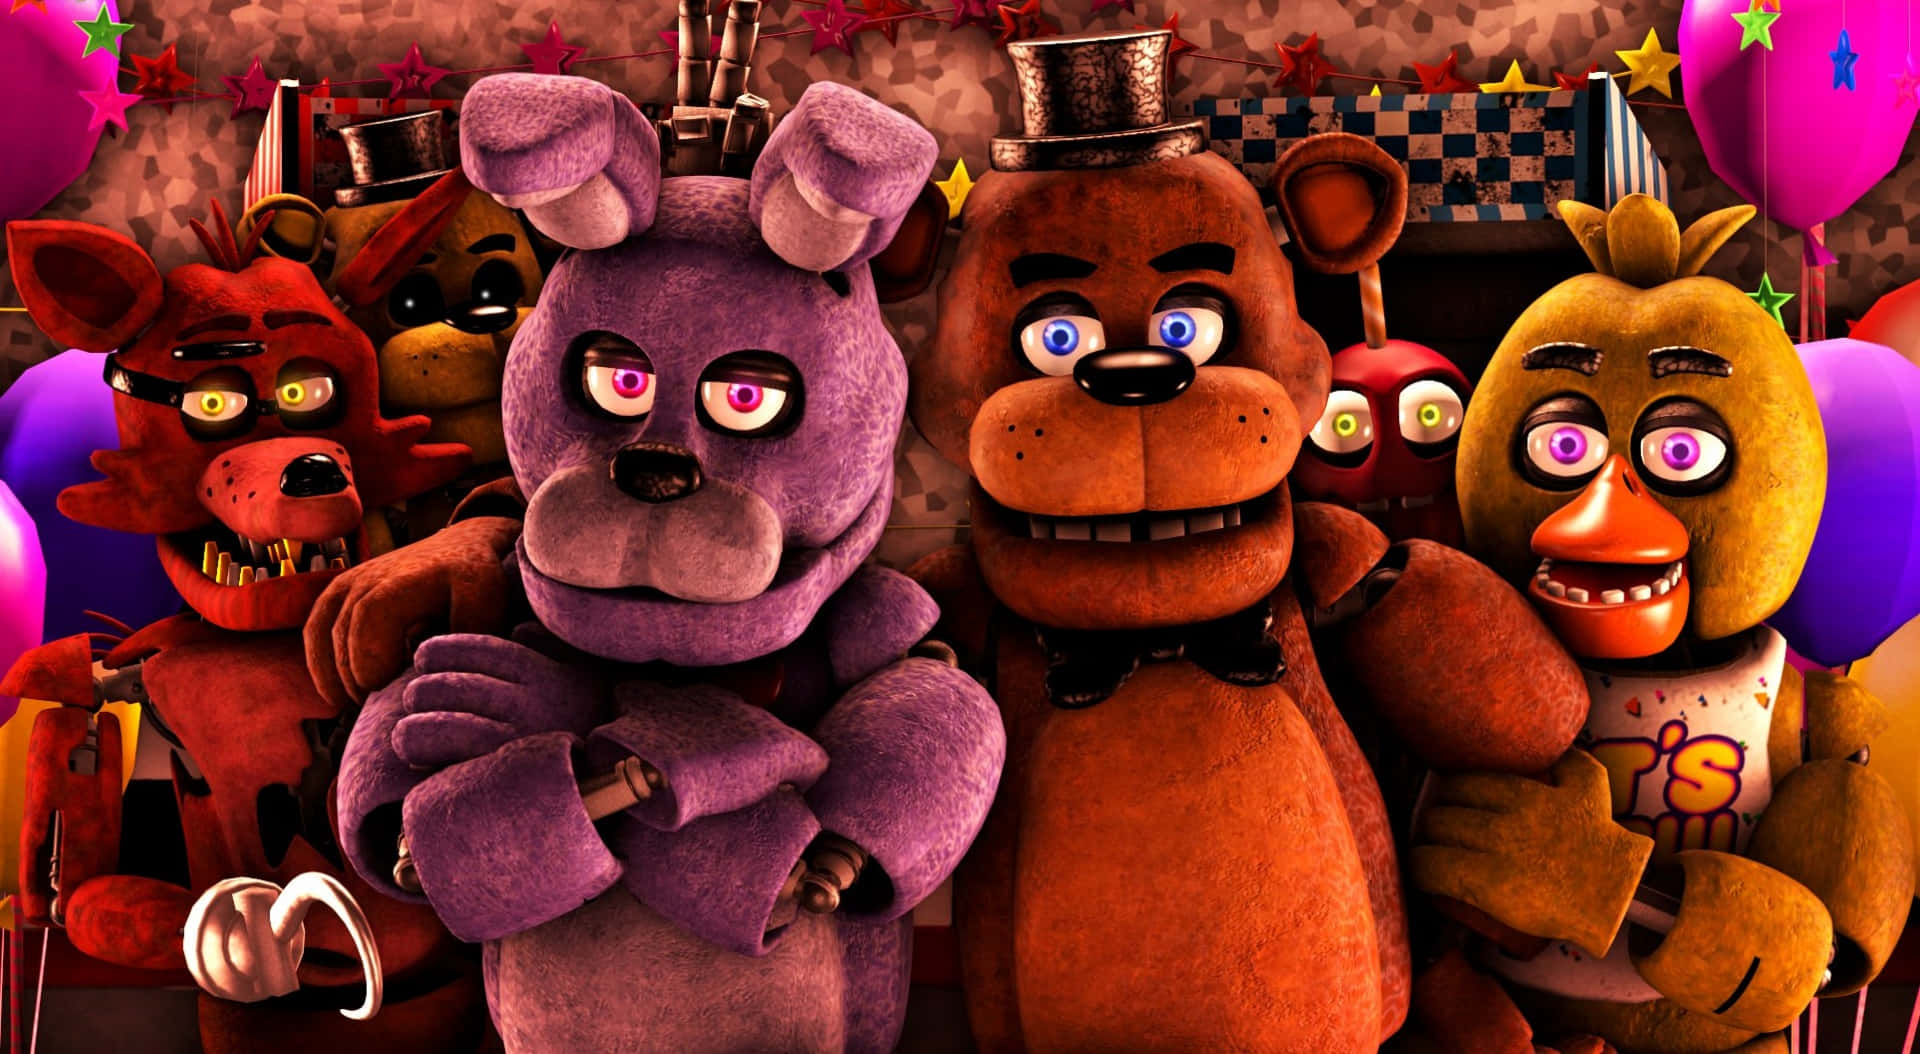 The Character Cast of Five Nights at Freddy's